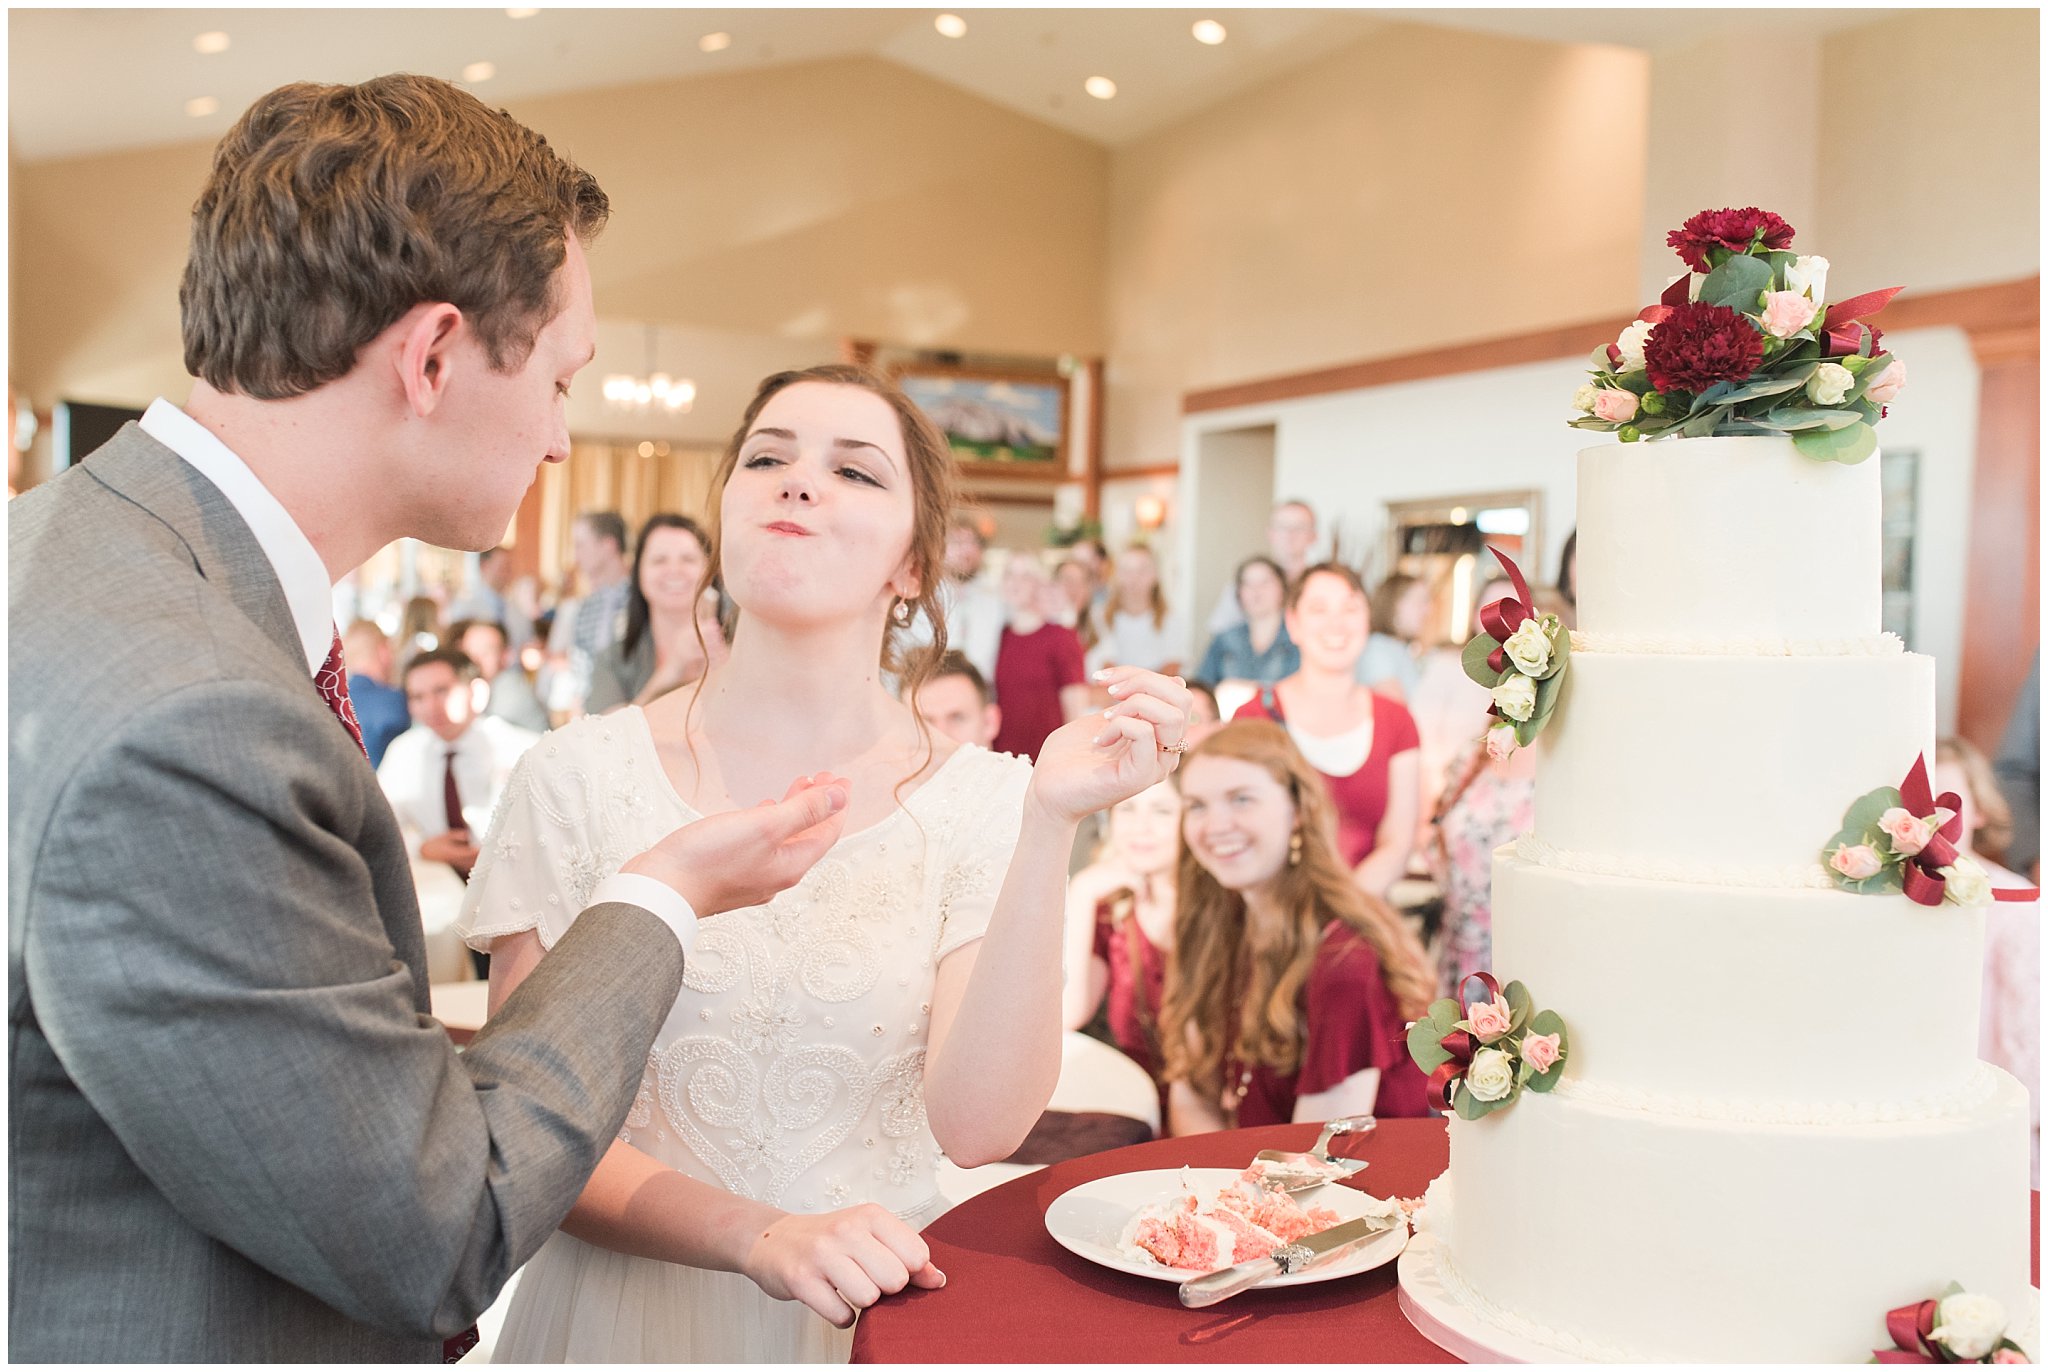 Cake cutting at reception | Grey, Burgundy, and Gold Wedding | Draper Temple and South Mountain Wedding | Utah Wedding Photographers | Jessie and Dallin Photography